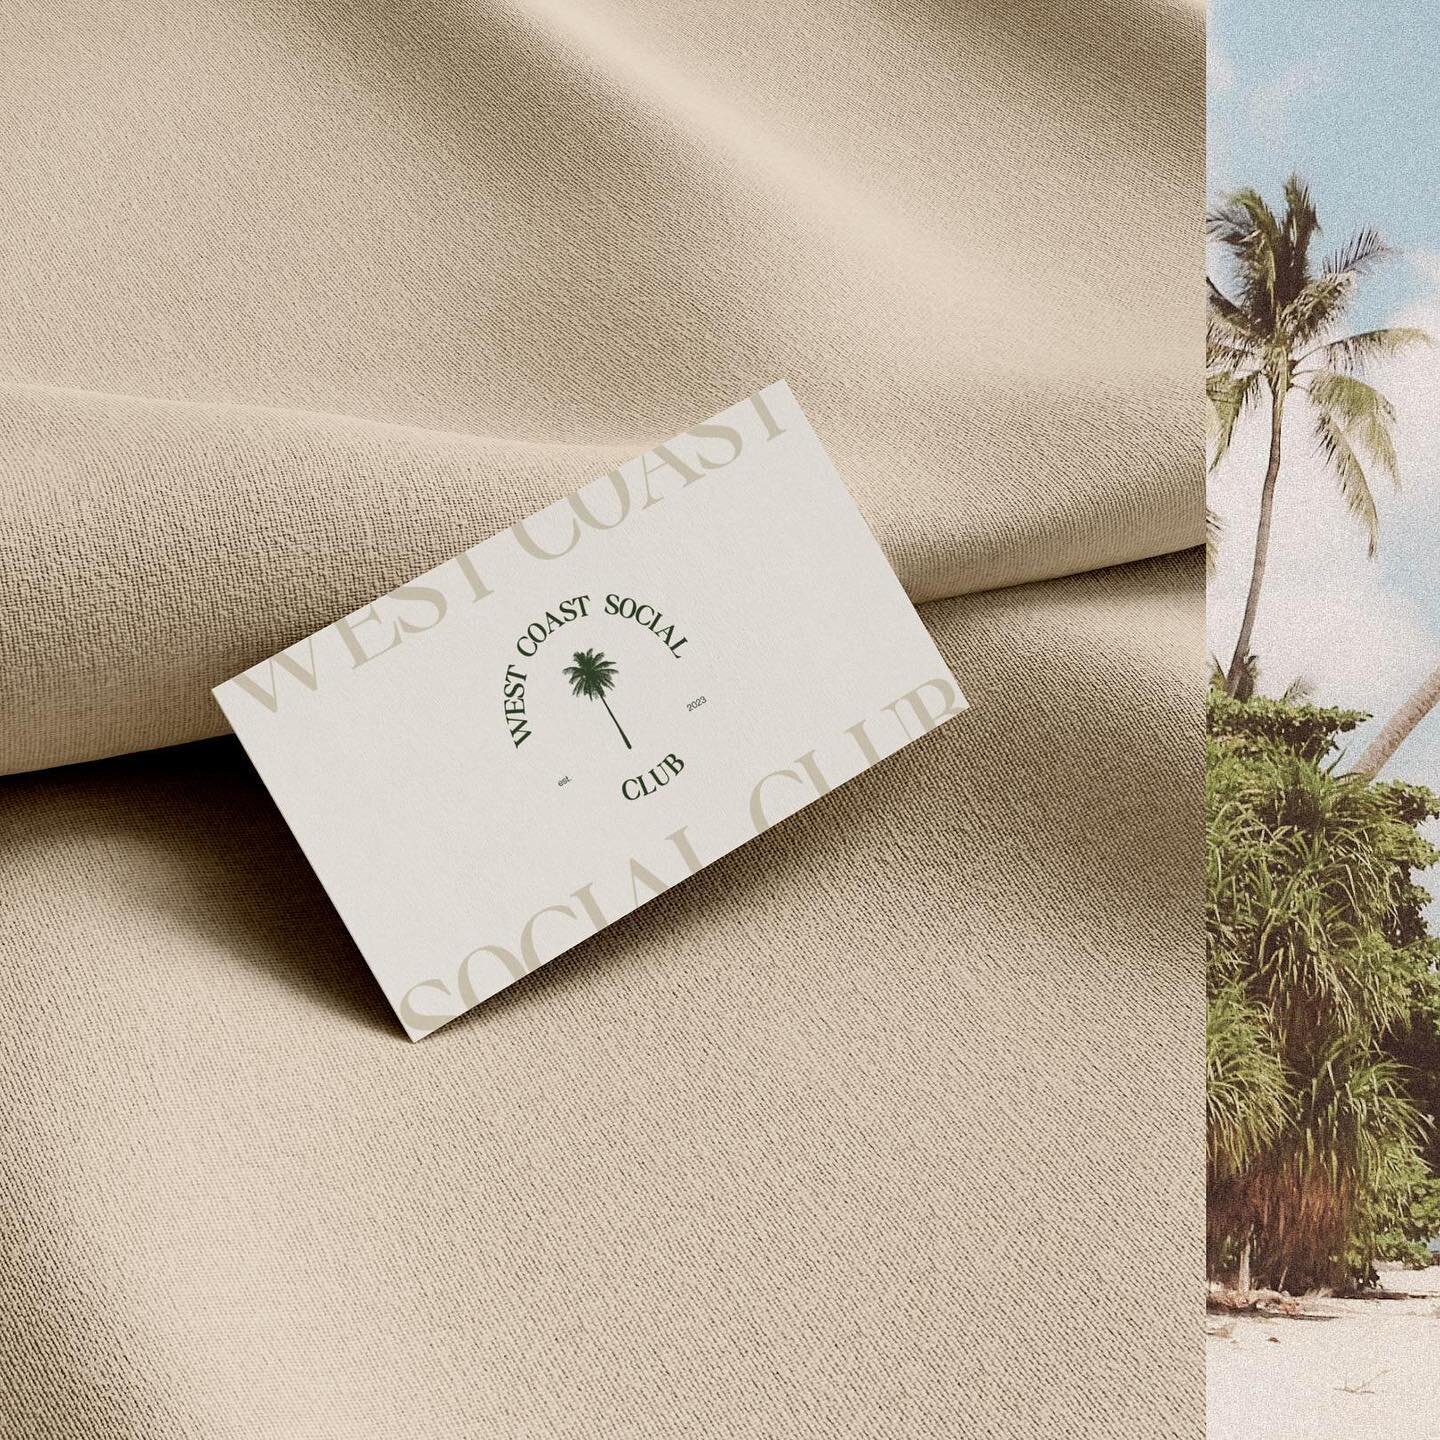 Life&rsquo;s a beach, and so is working with us 🌞
Here&rsquo;s a glimpse into our brand identity &mdash; where relaxation meets timeless luxury (we love the best of both worlds). Let us know how we can help with yours! 

#westcoastsocialclub #creati